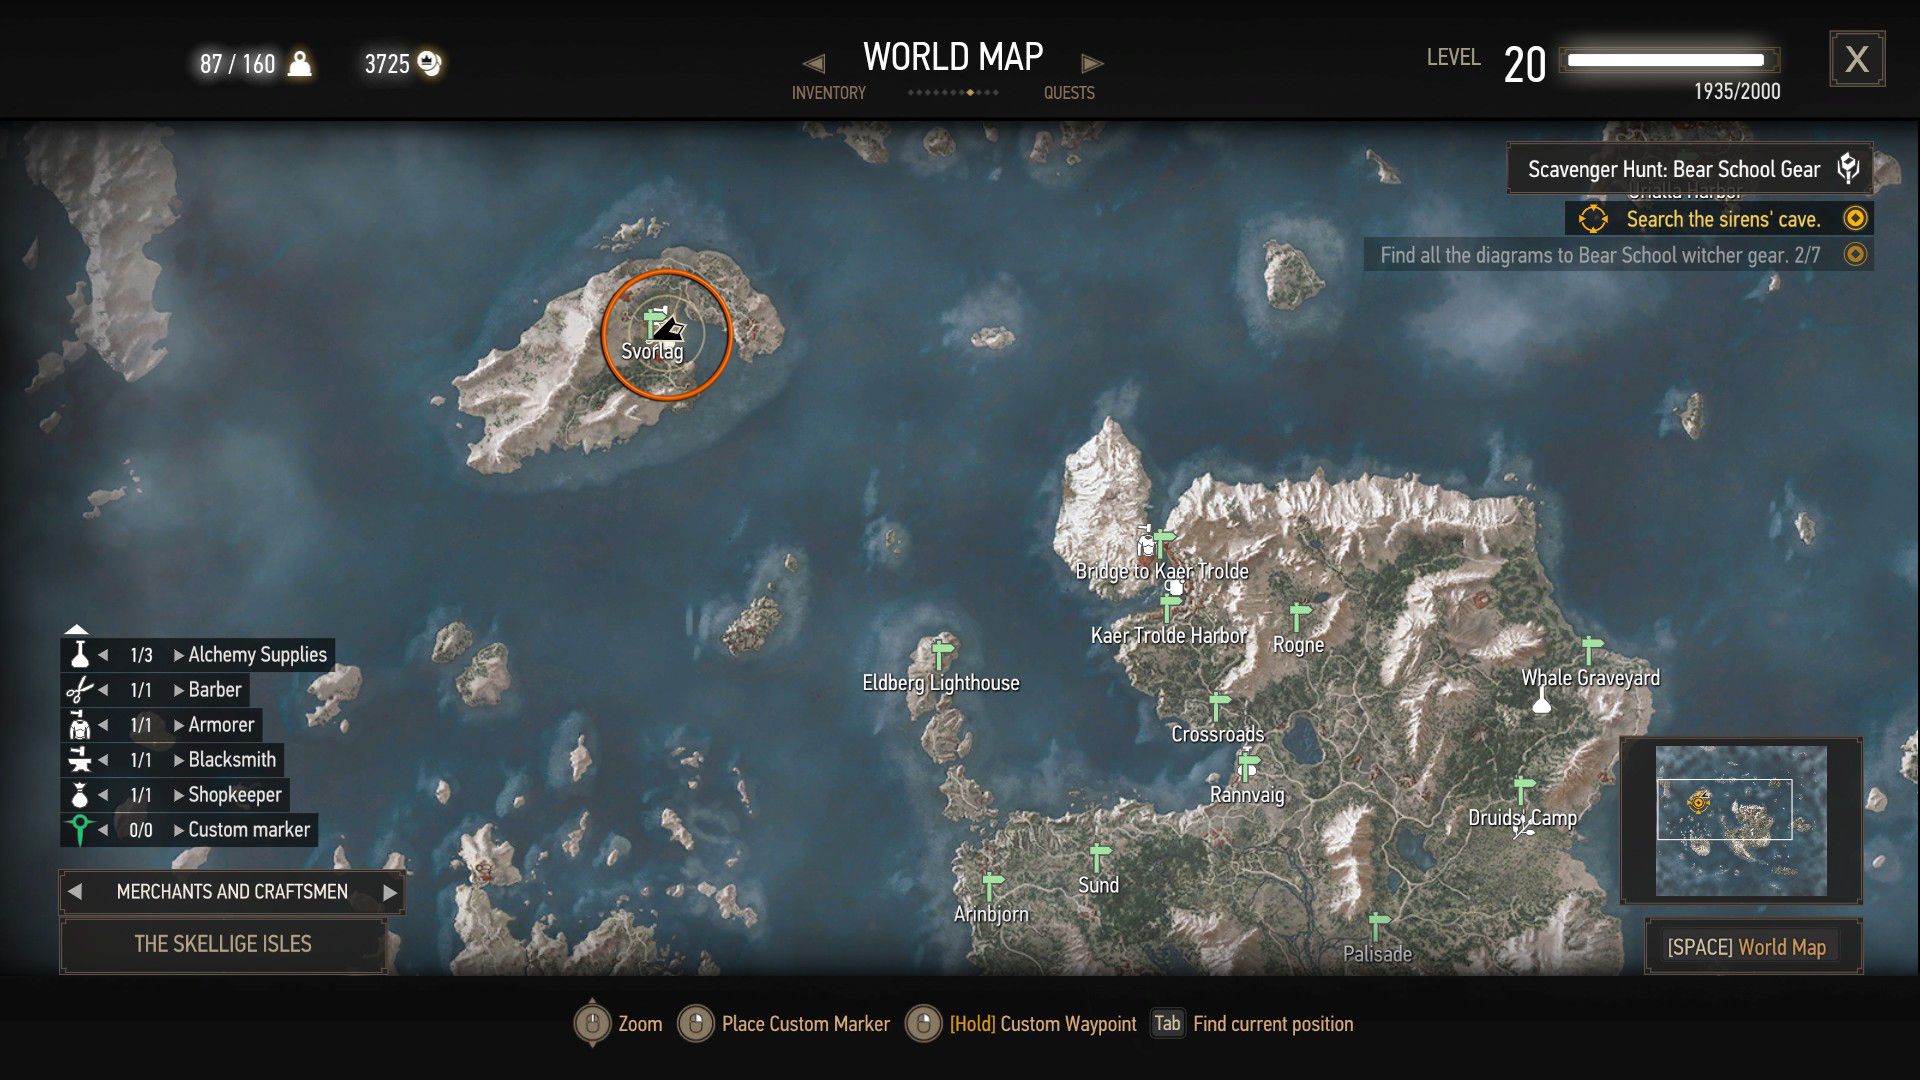 A screenshot of The Witcher 3 map showing the quest location with an orange circle.